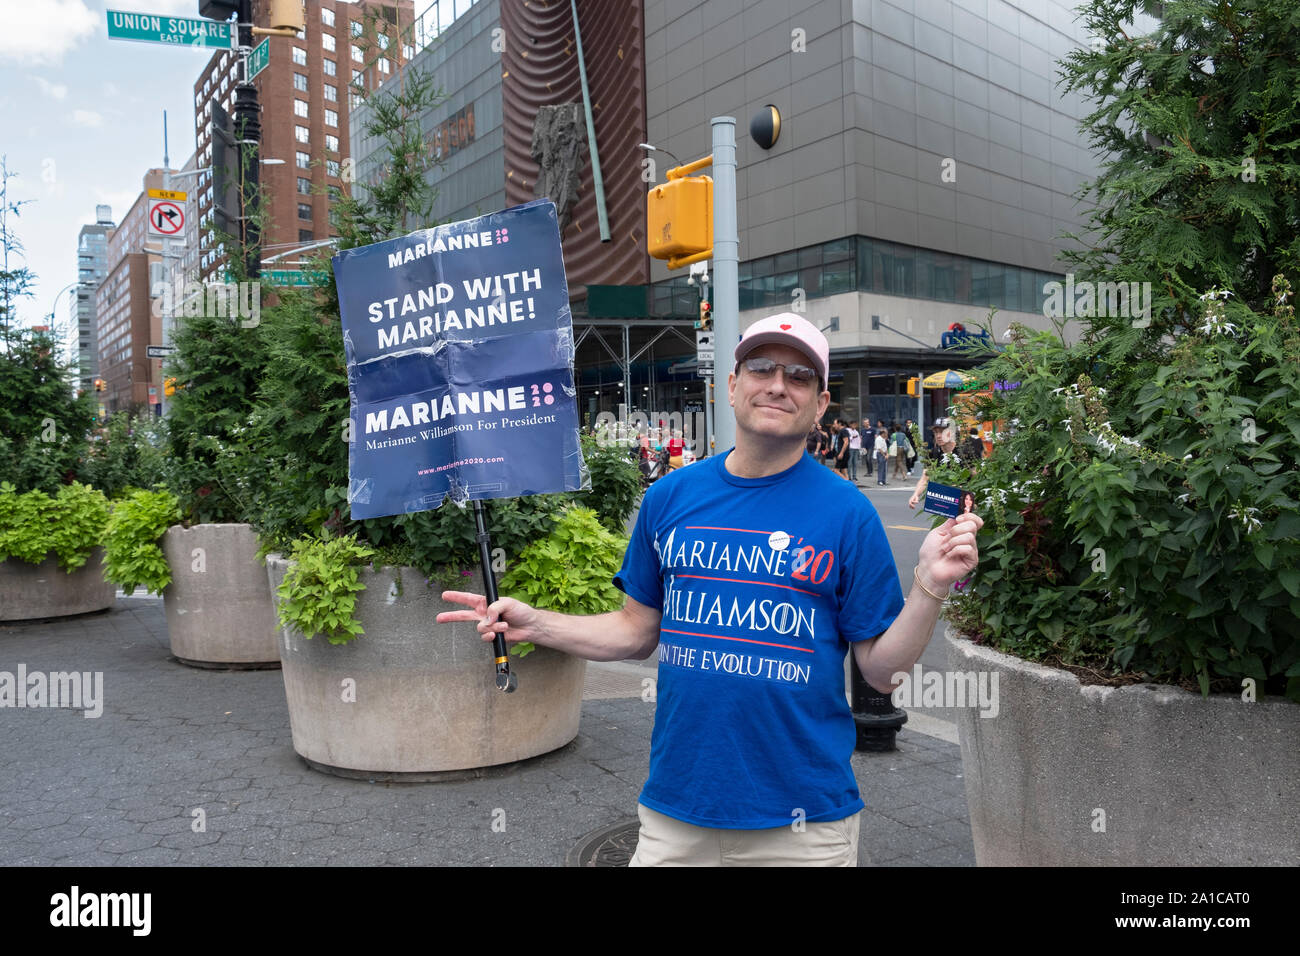 A middle aged man campaigns for Marianne Williamson, an underdog Democratic party candidate for President. In Union Square Park, Manhattan, New York. Stock Photo